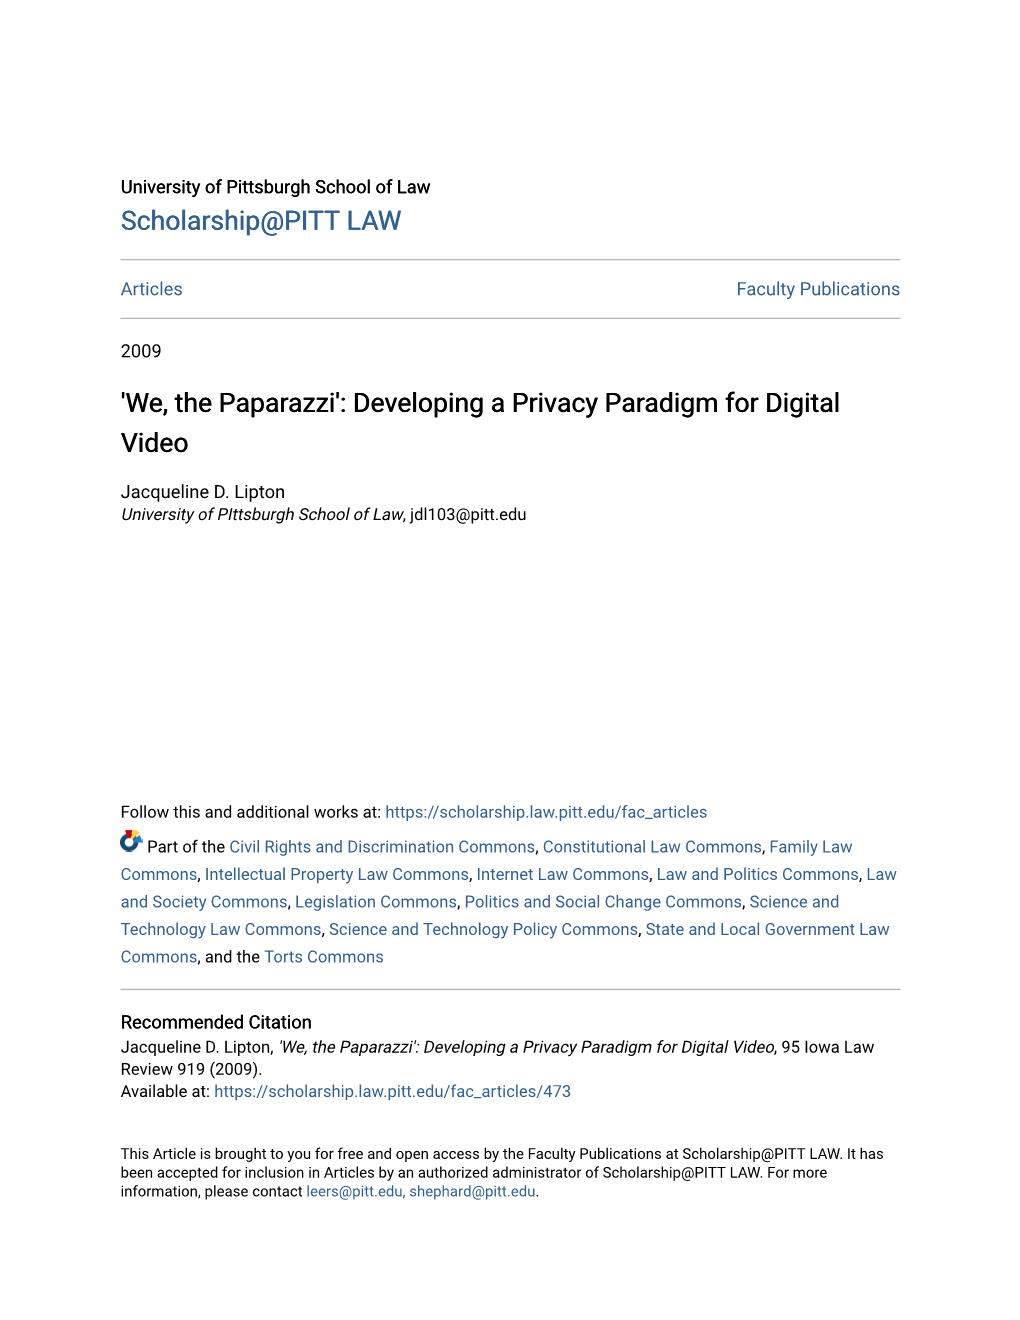 We, the Paparazzi': Developing a Privacy Paradigm for Digital Video